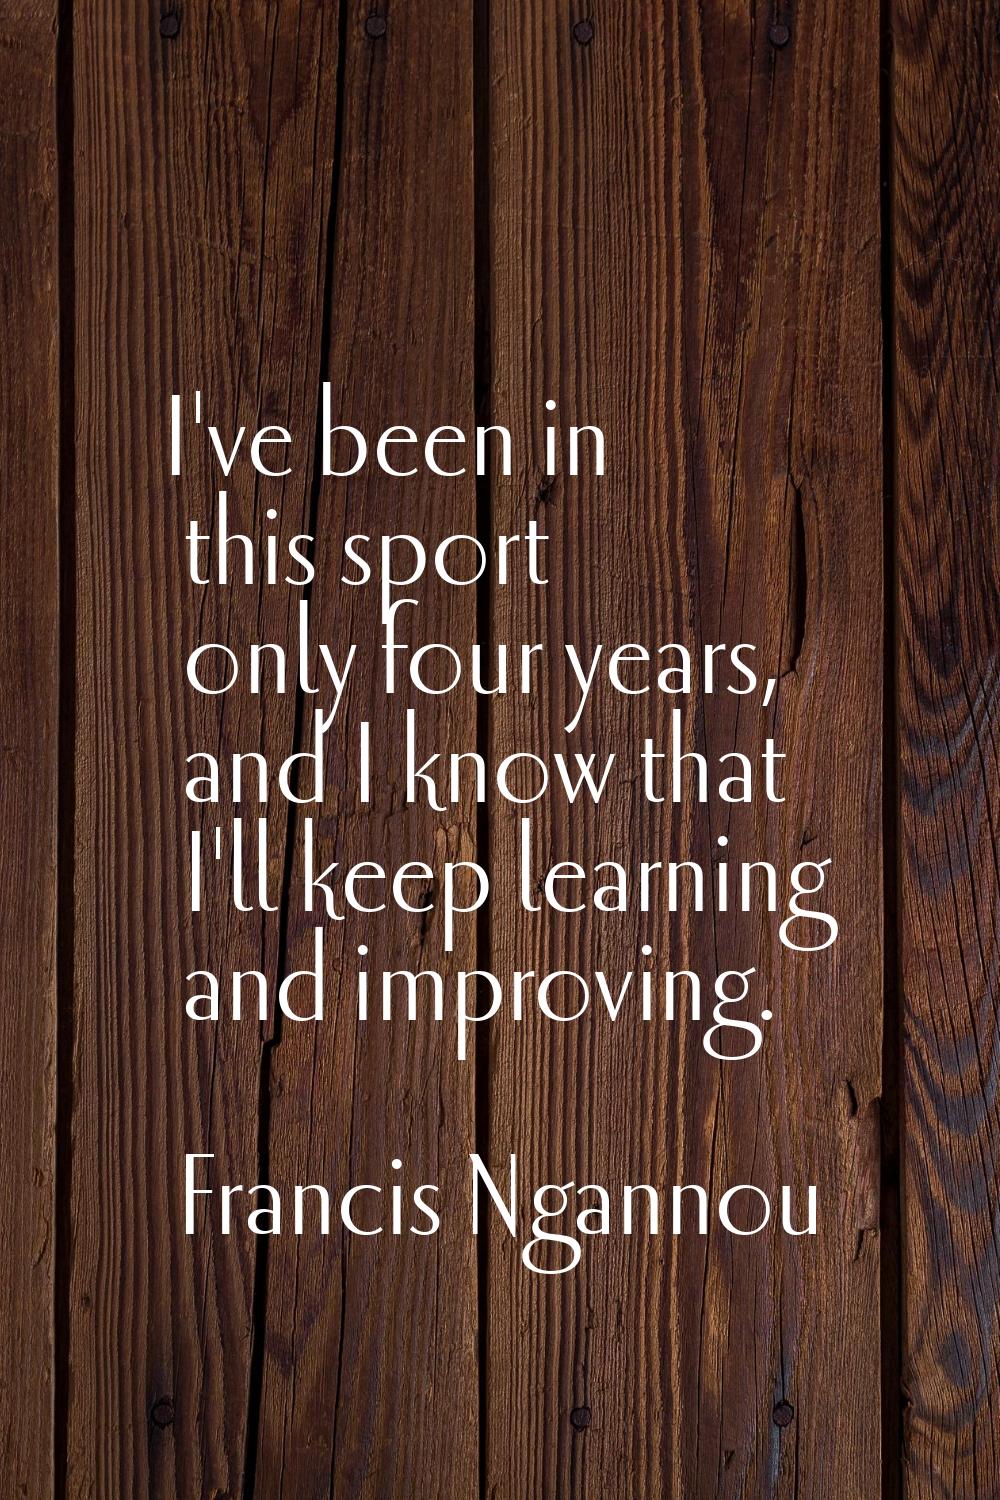 I've been in this sport only four years, and I know that I'll keep learning and improving.